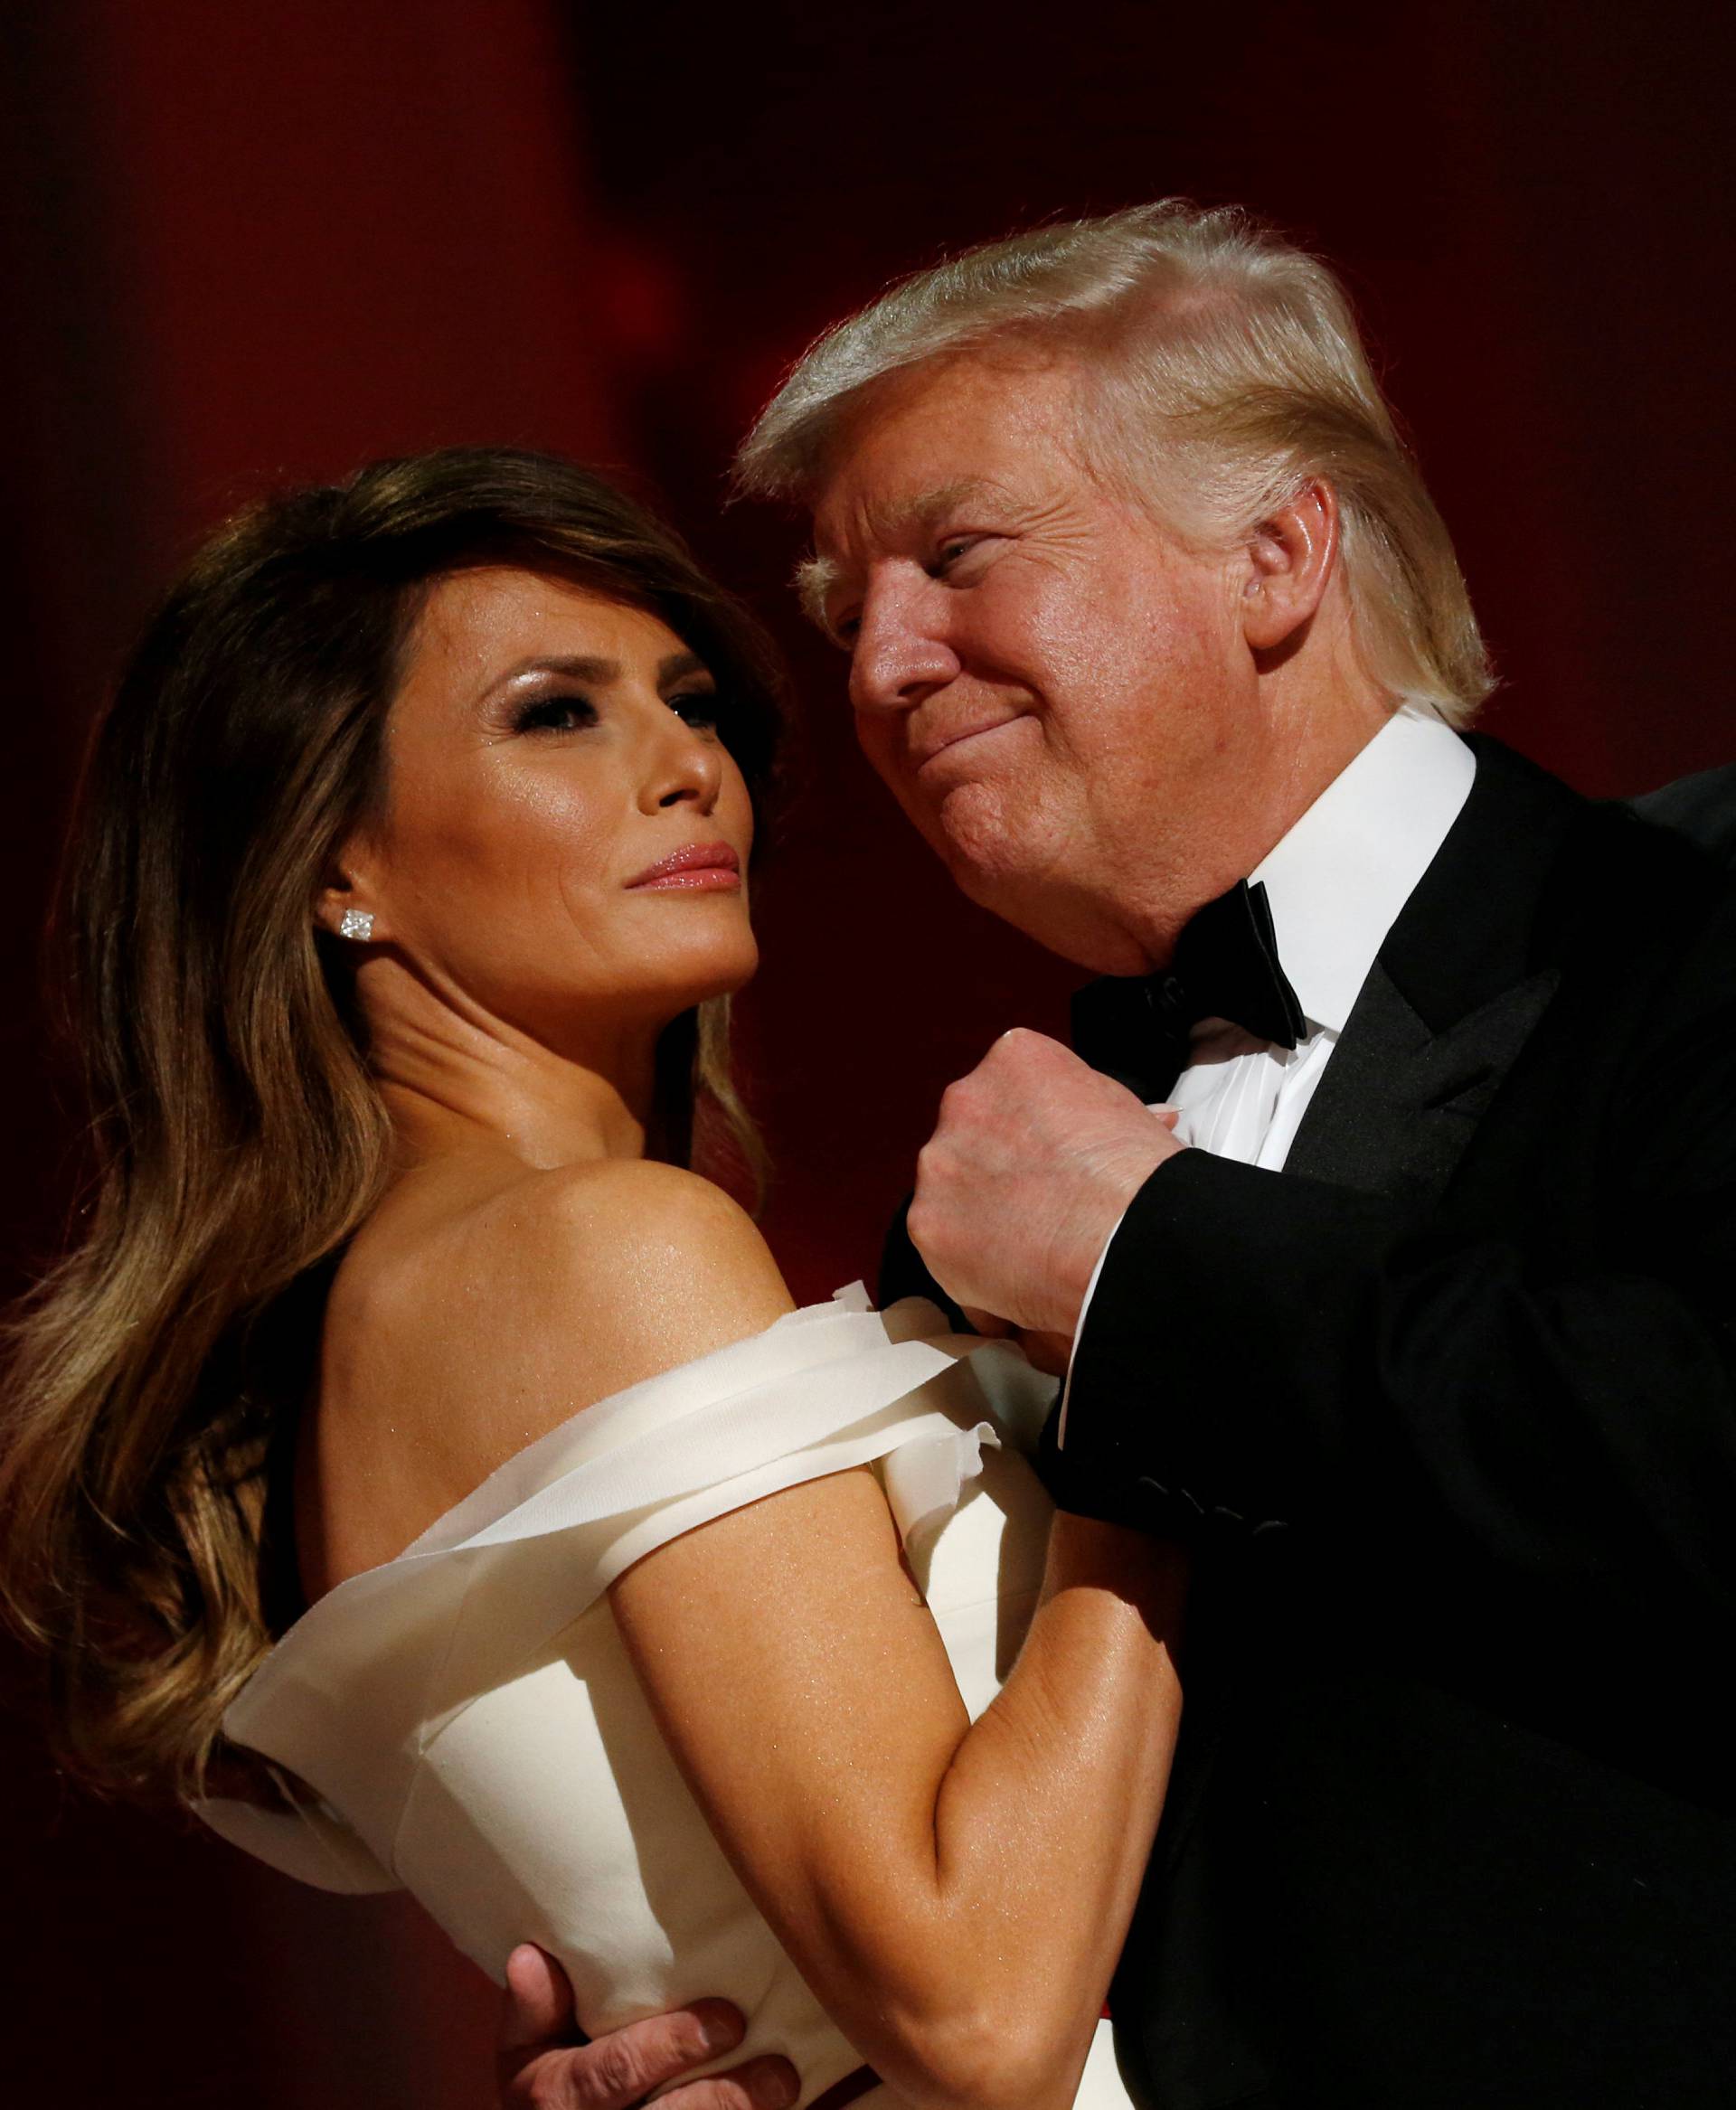 Trump attends the Liberty Ball in honor of his inauguration in Washington